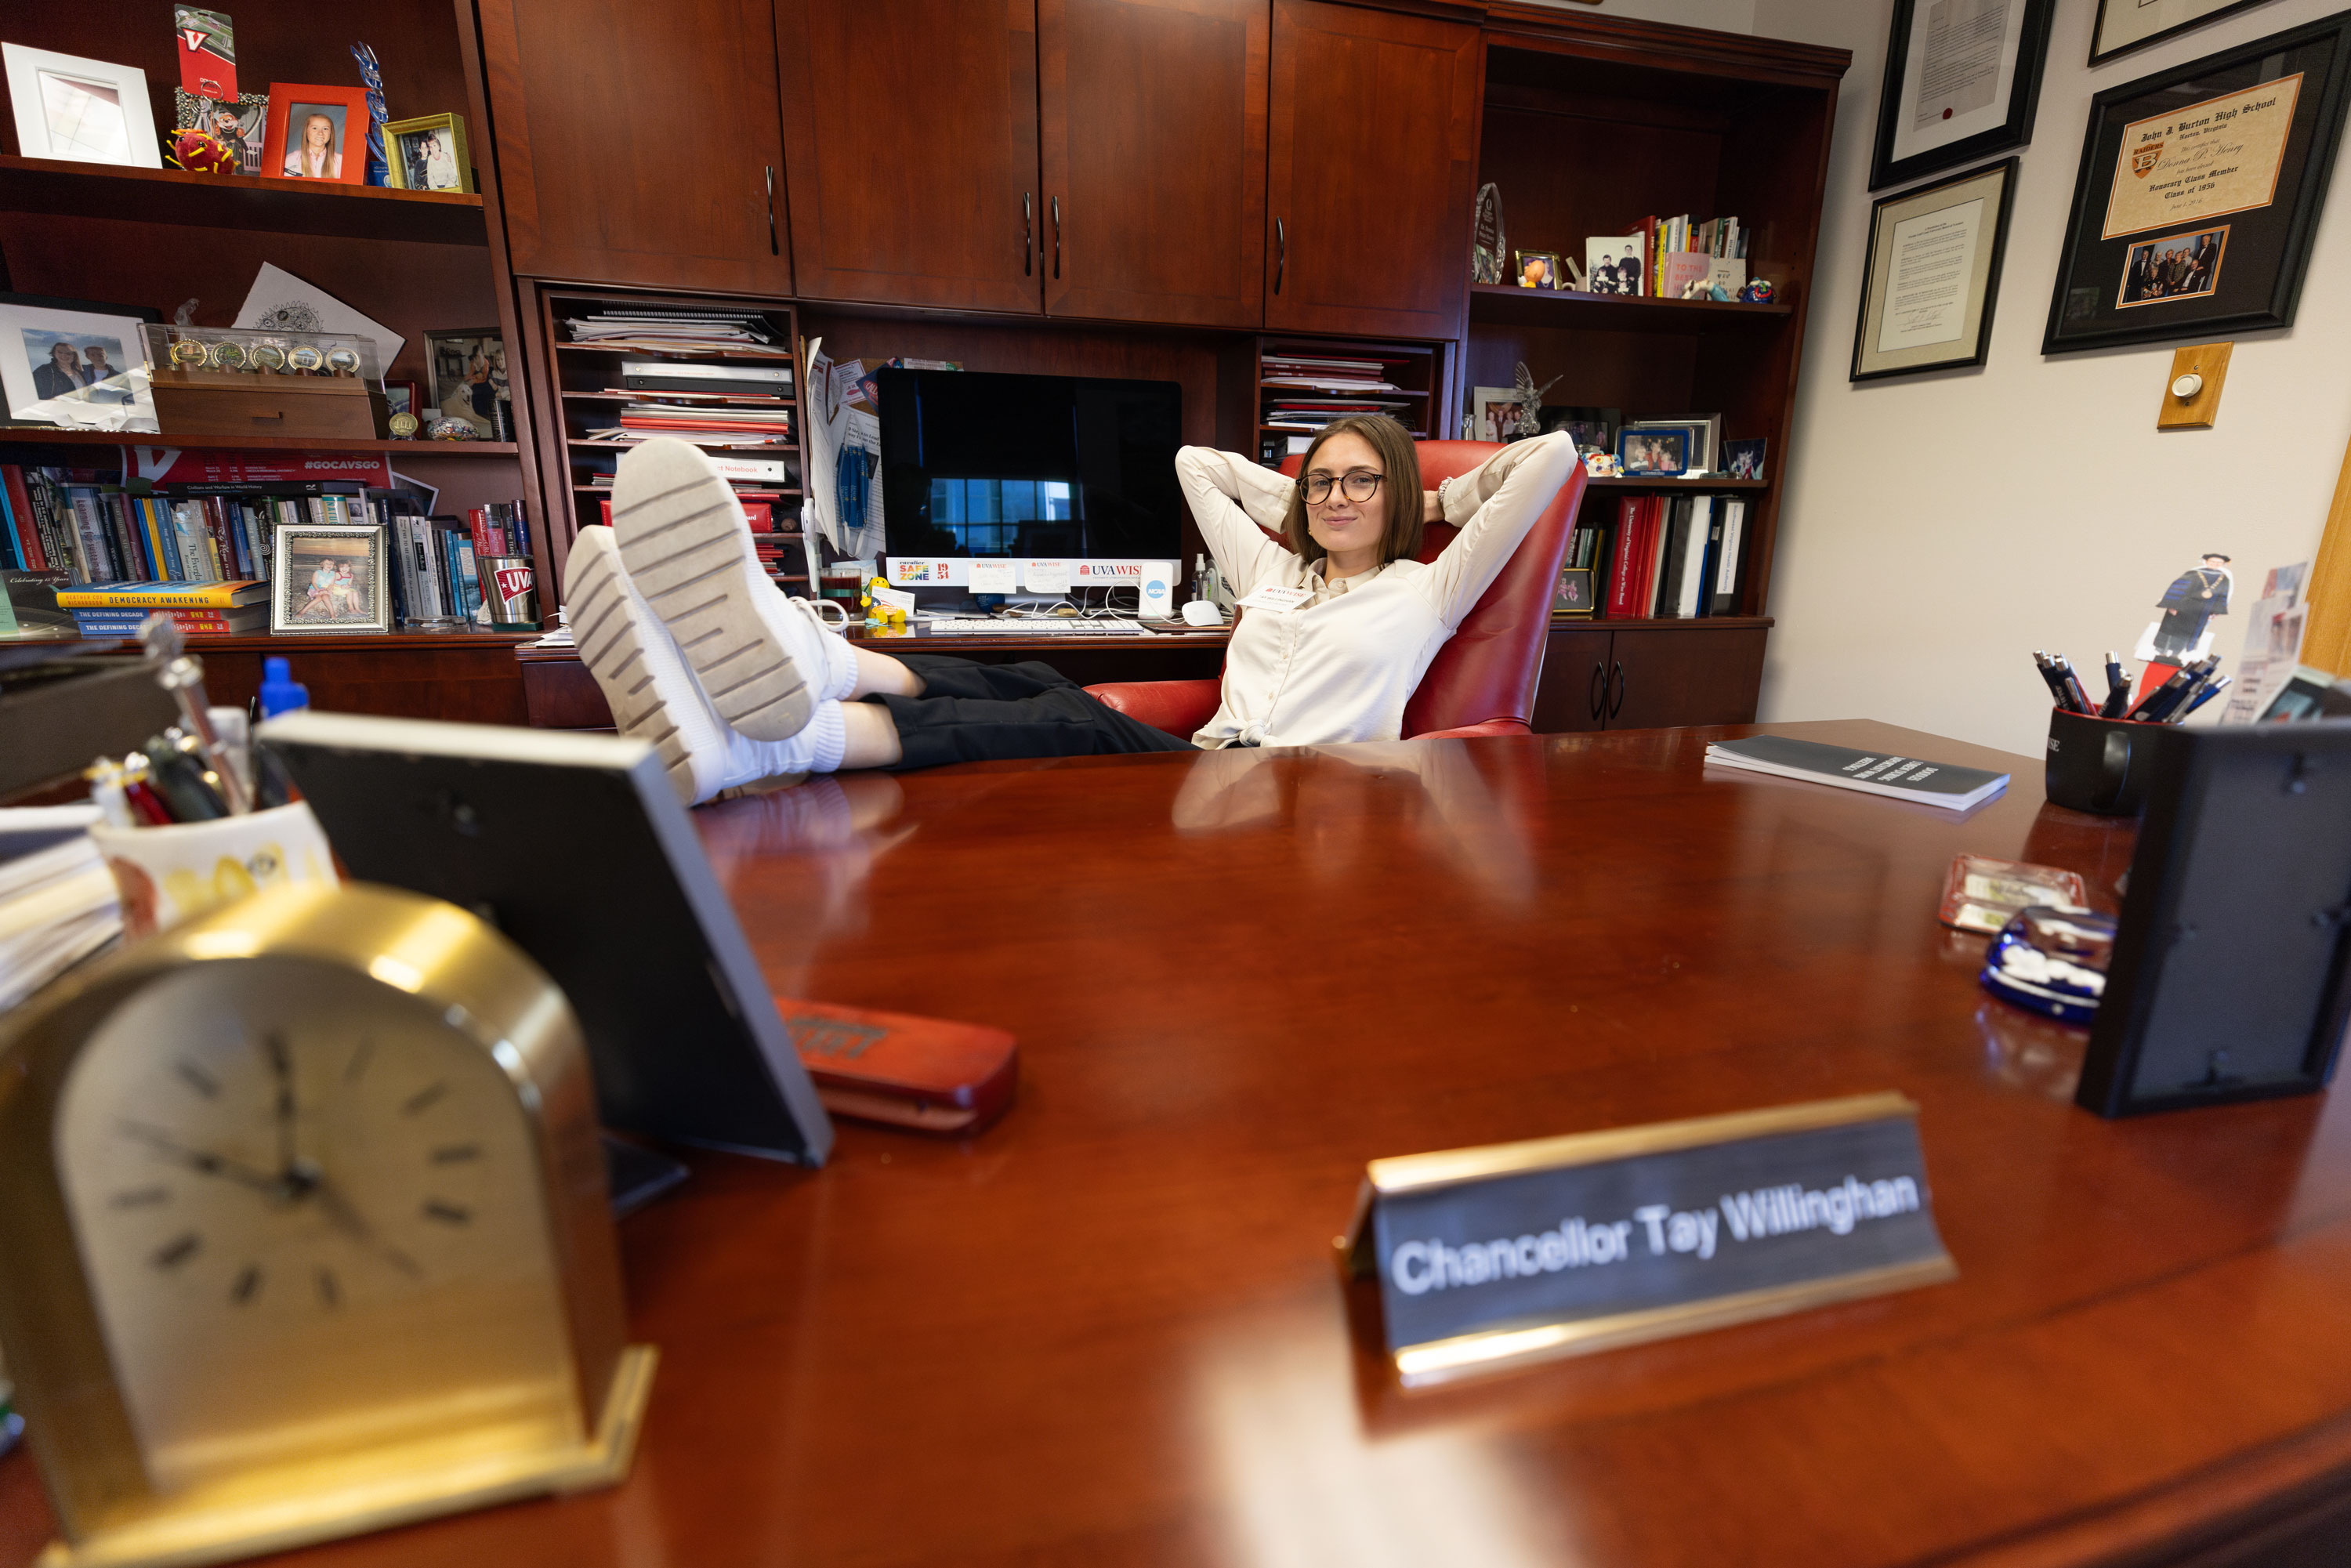 Tay Willinghan in the Chancellor's Office